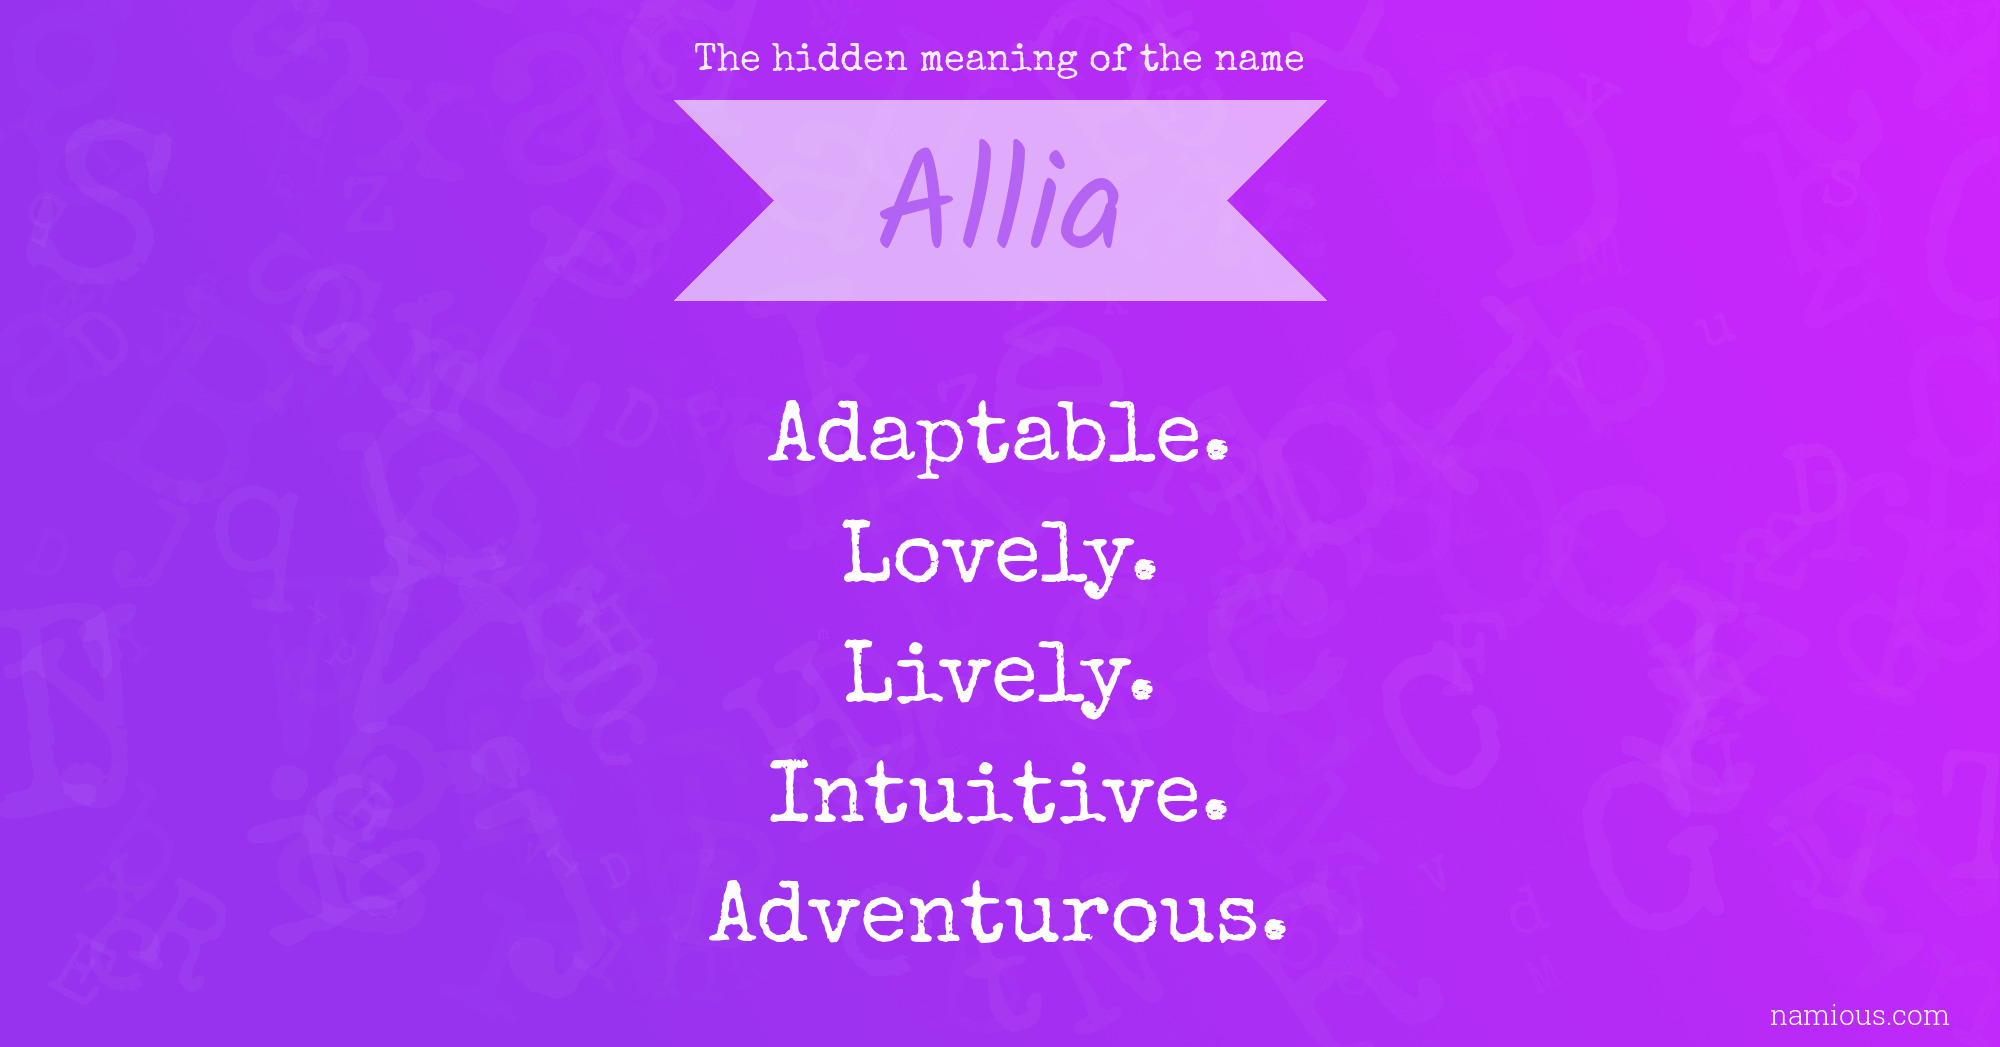 The hidden meaning of the name Allia